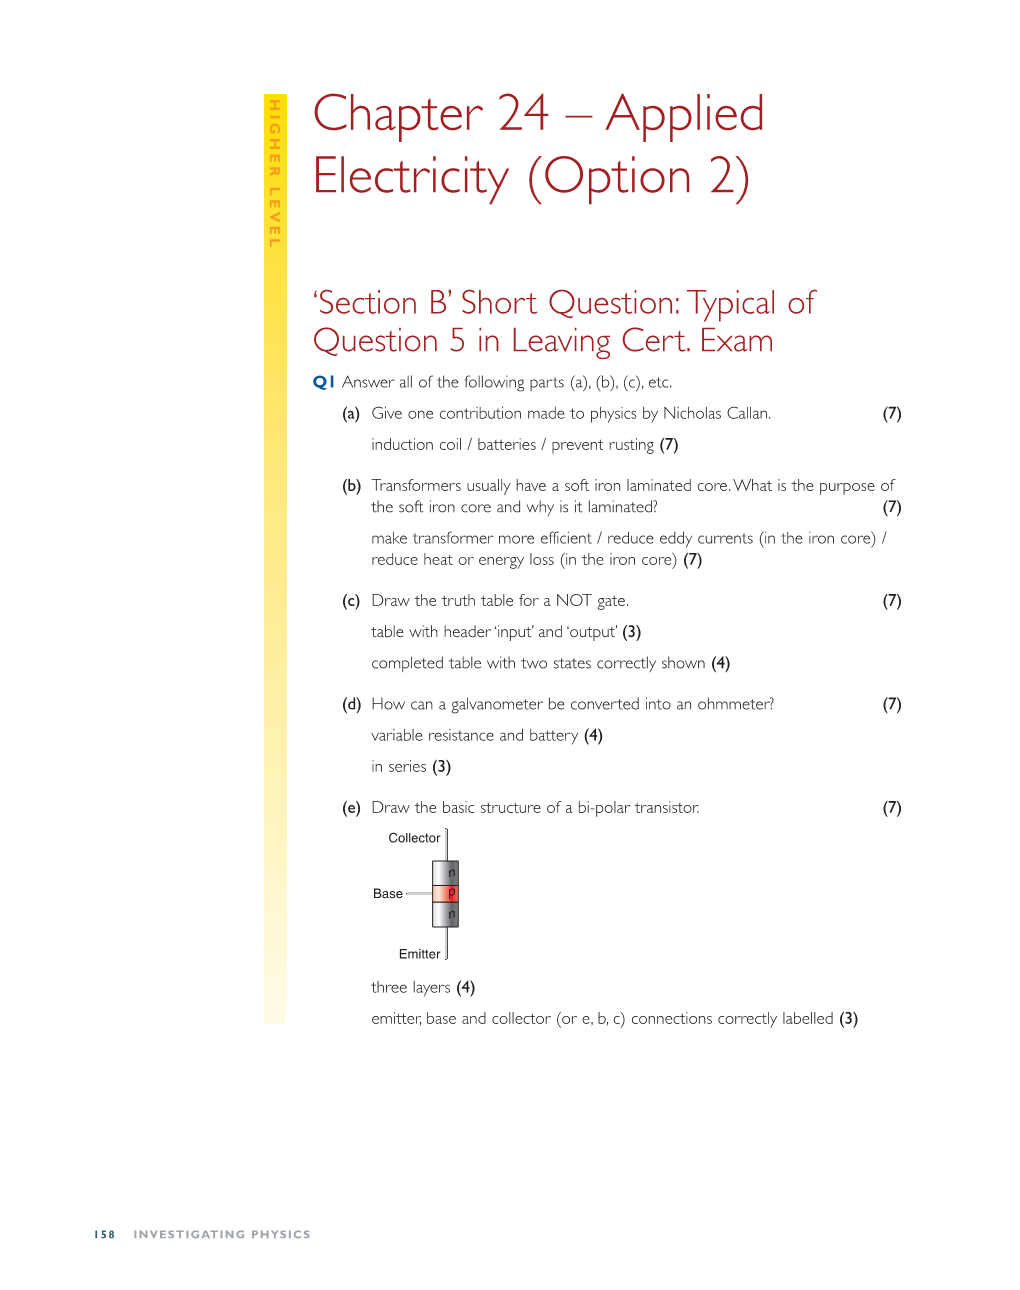 Applied Electricity (Option 2)